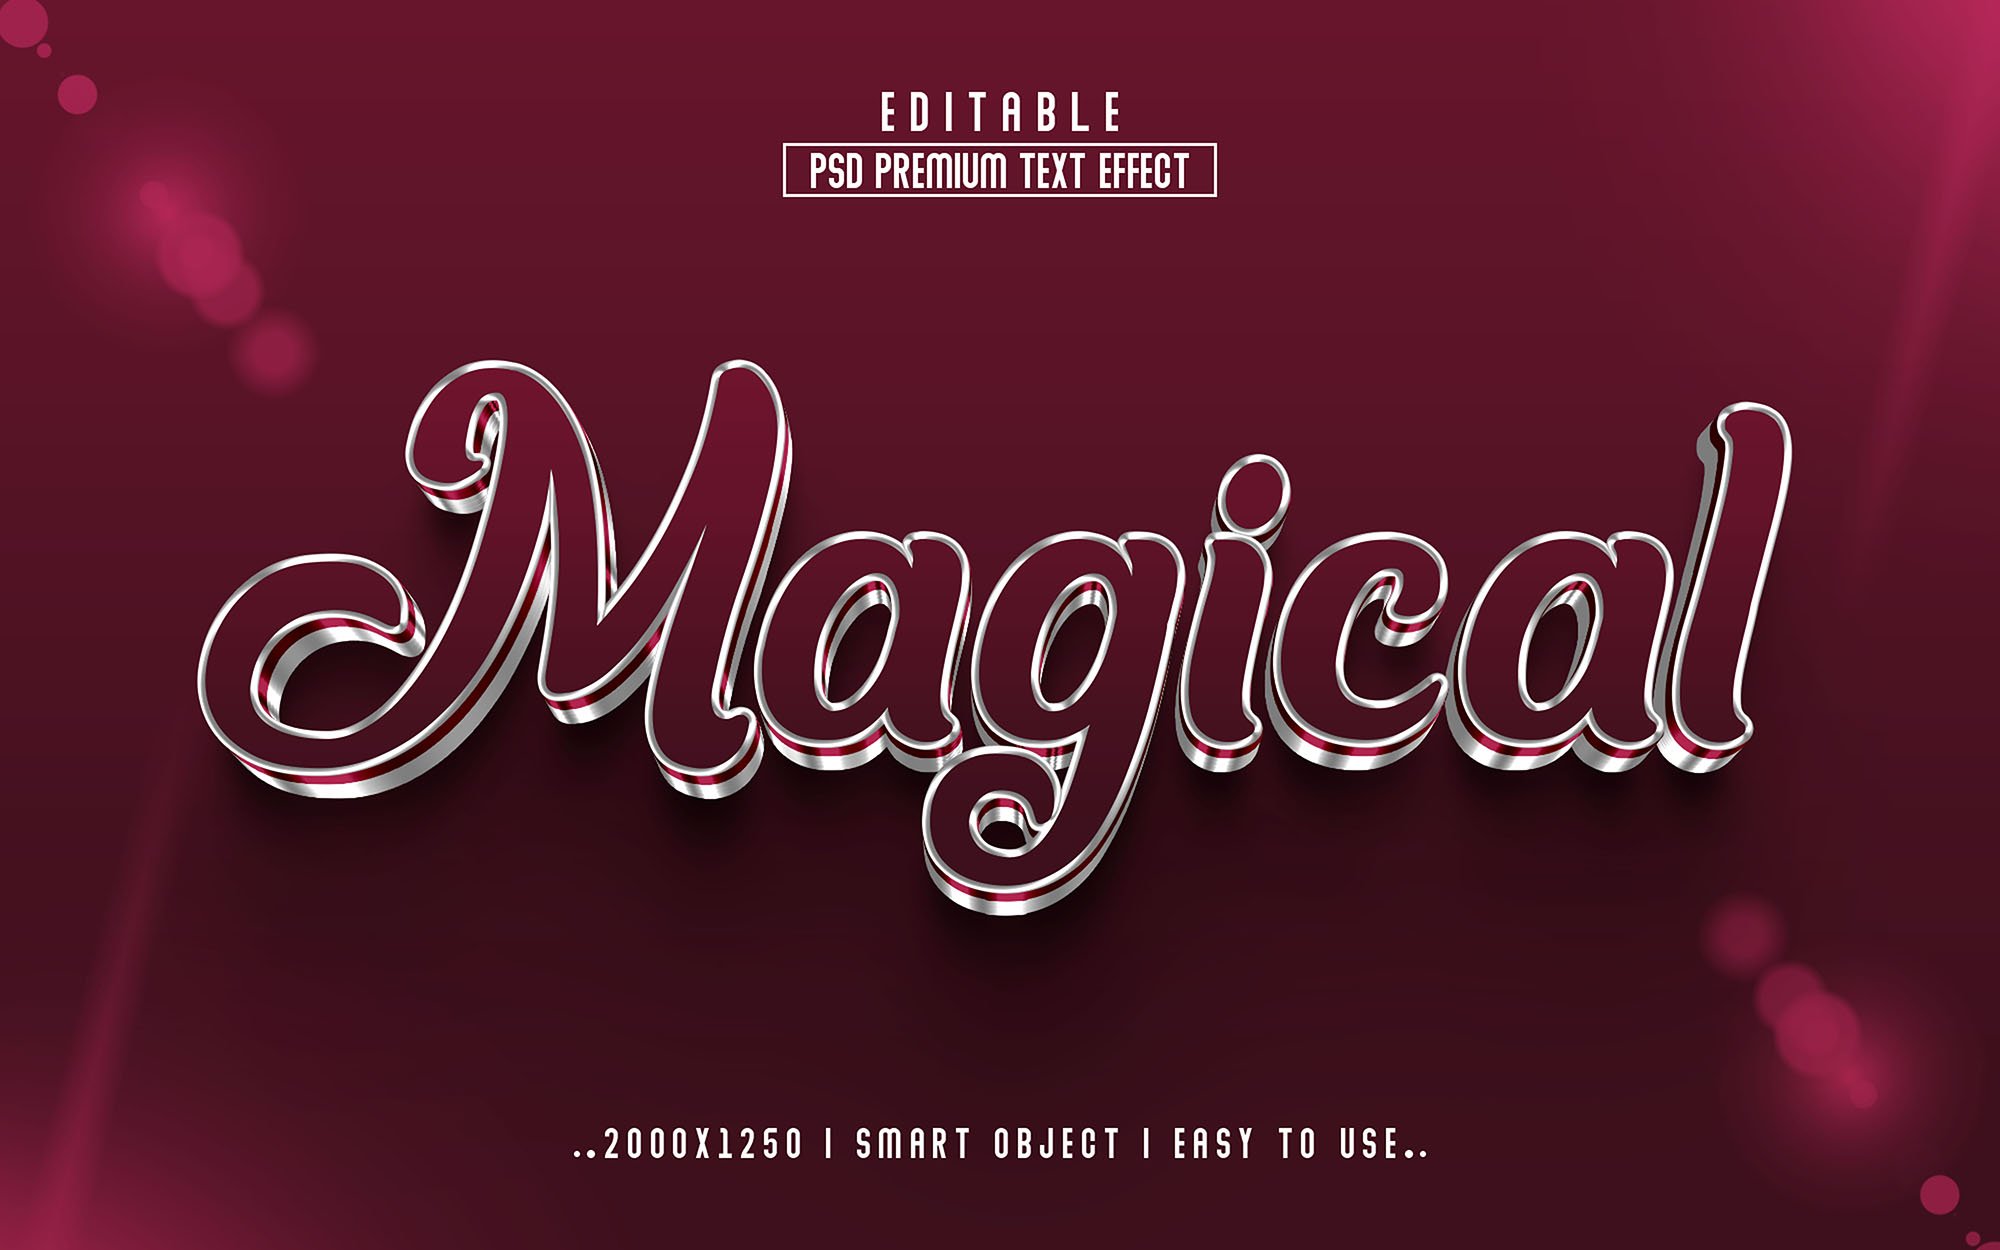 Magical 3D Editable Text Effectcover image.